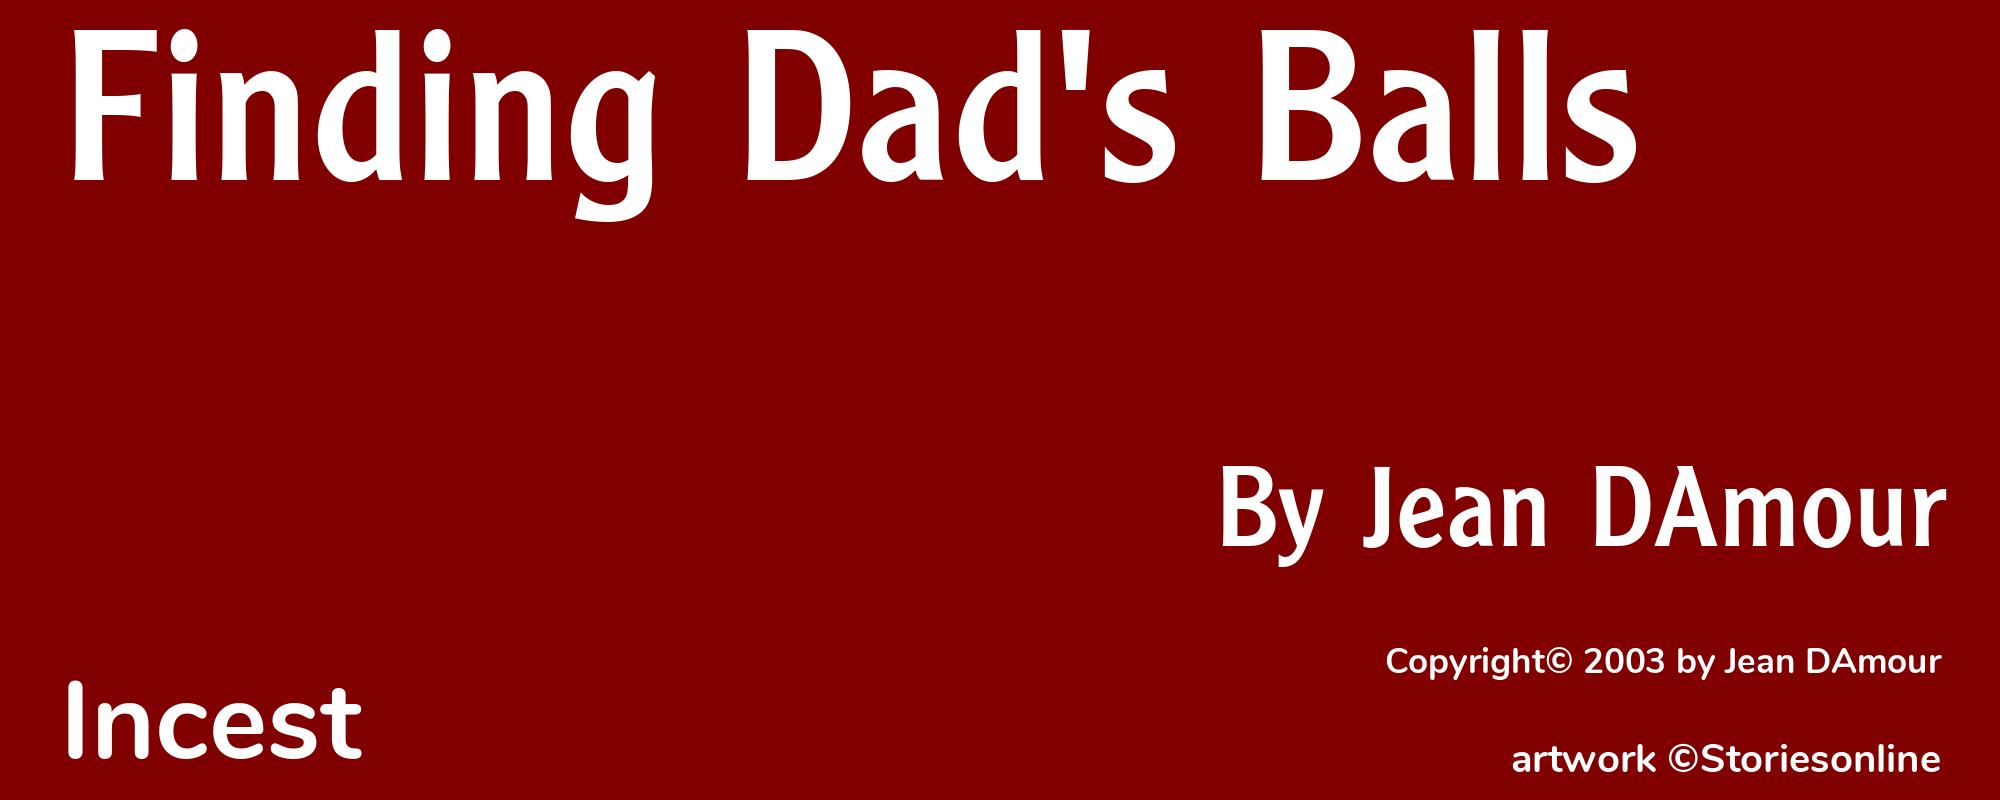 Finding Dad's Balls - Cover